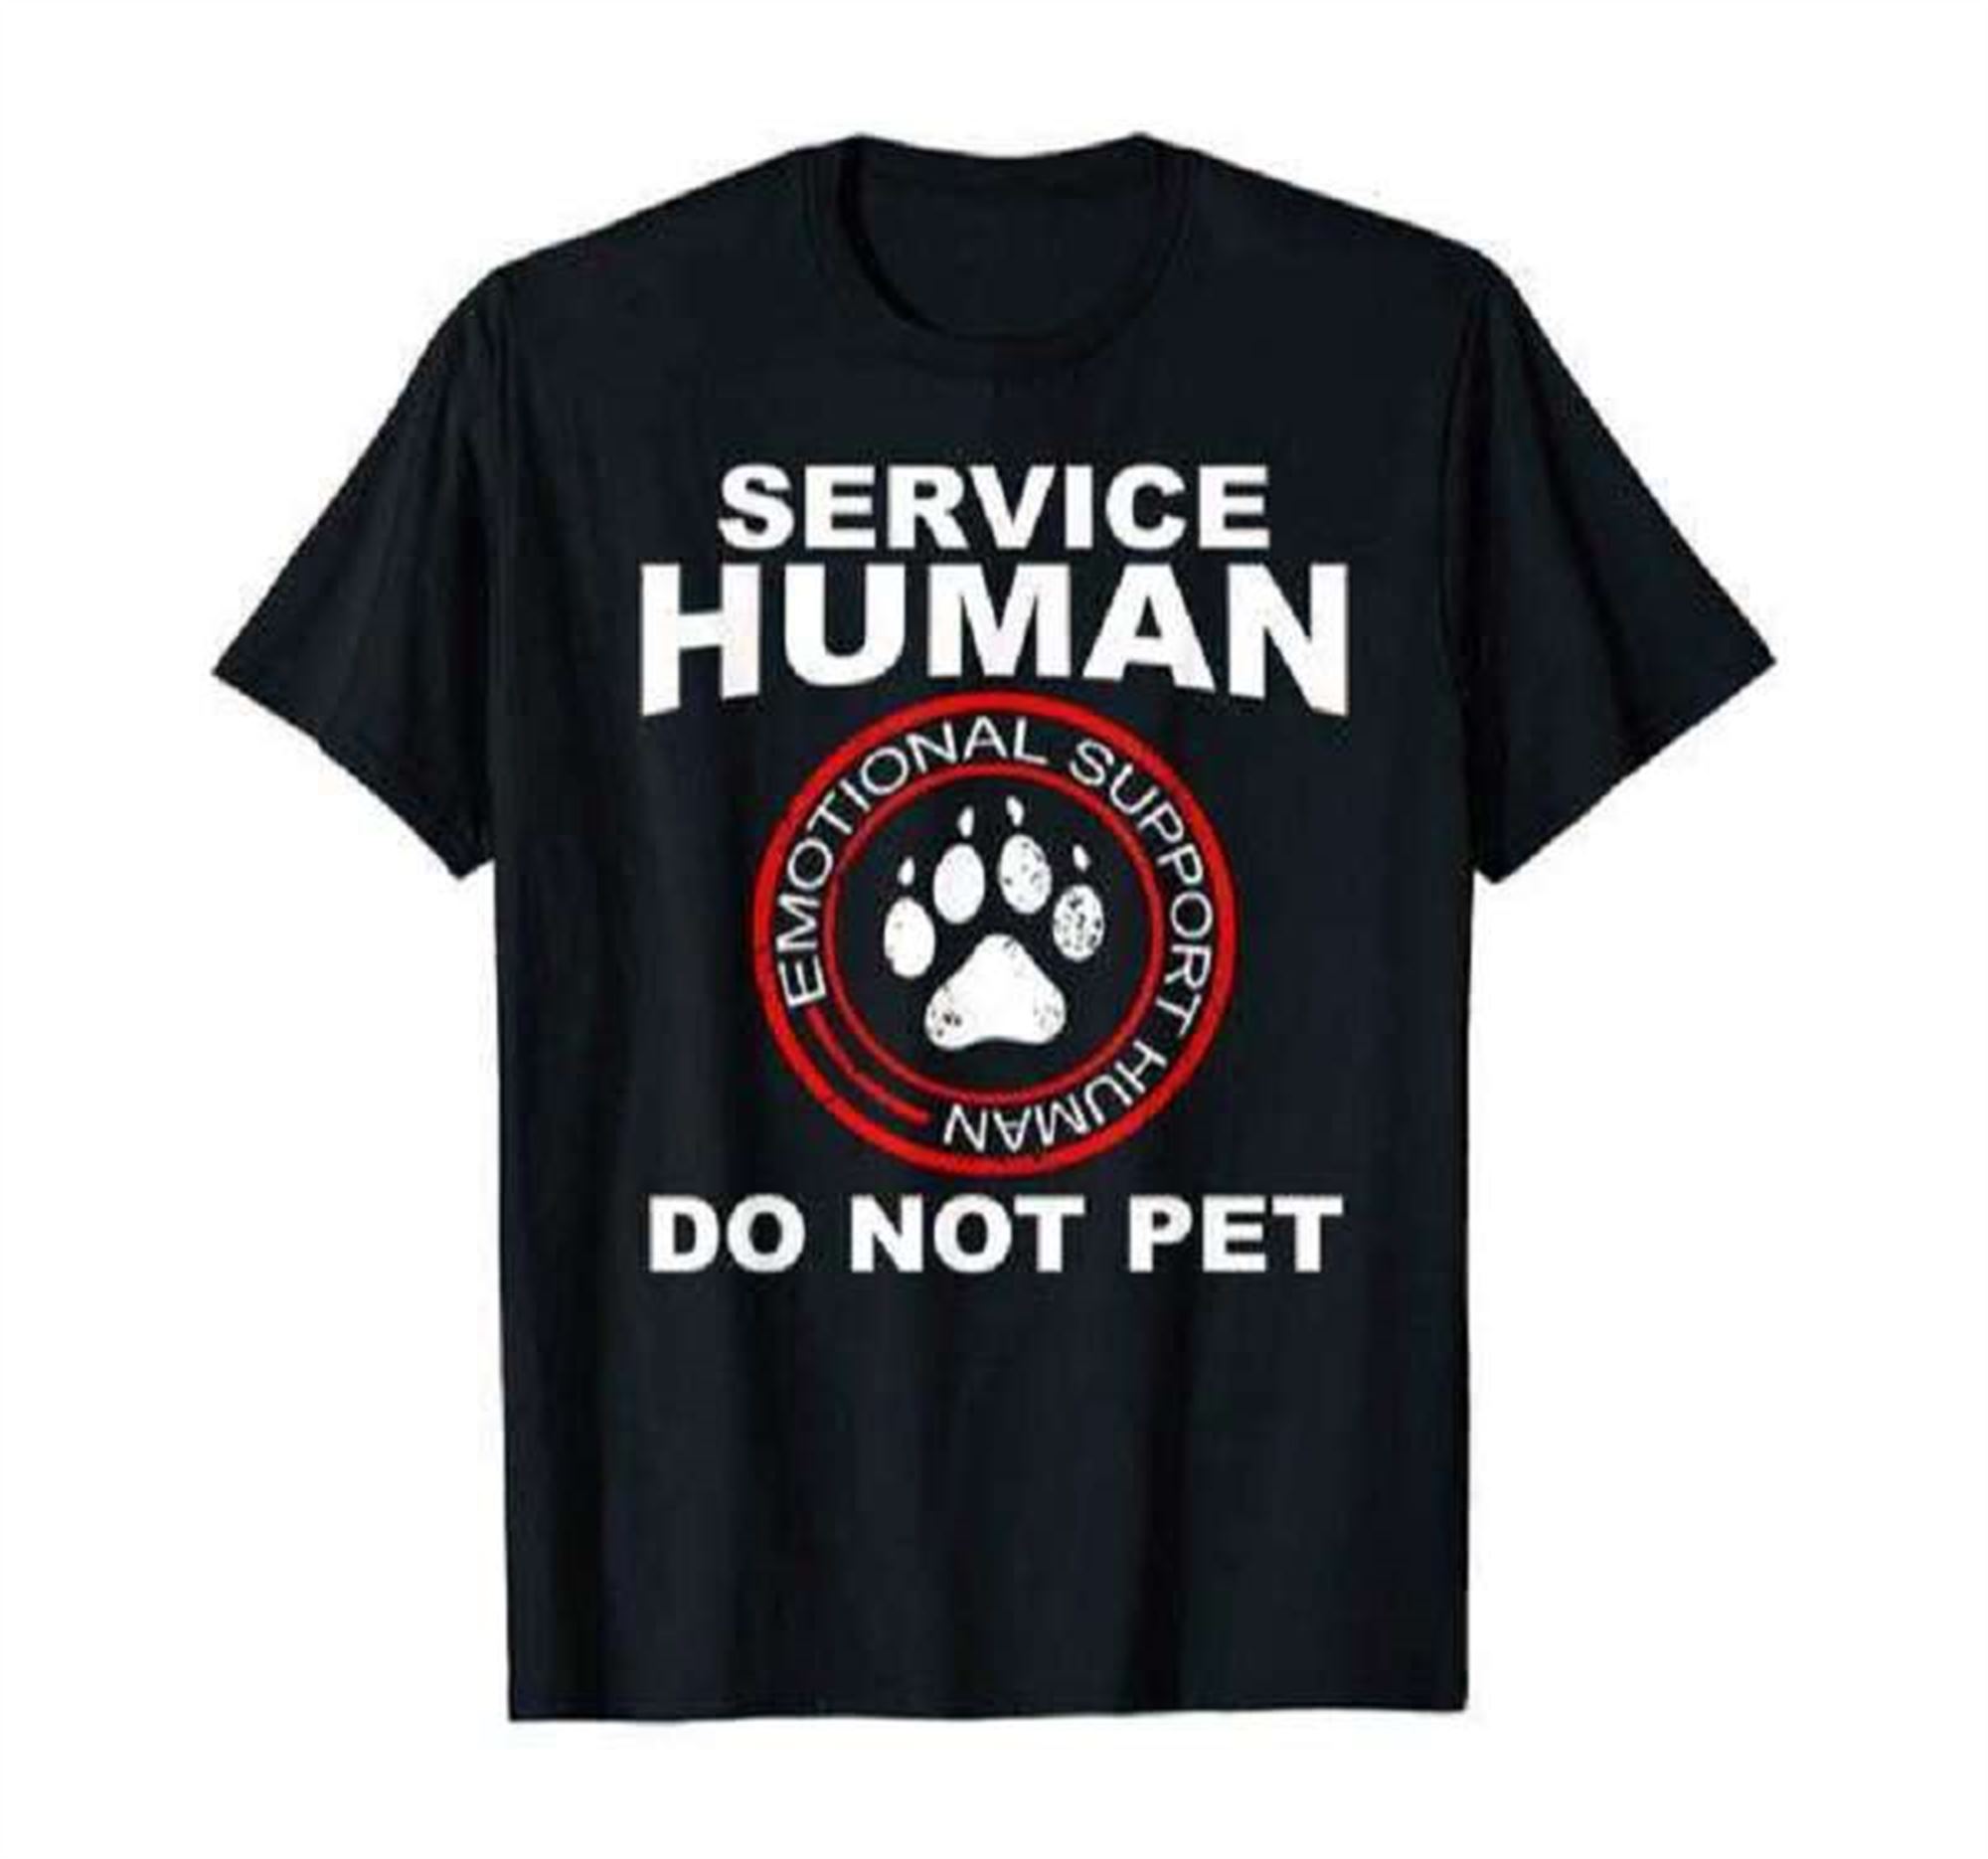 Service Human Shirt Funny Dog Owner Emotional Support Human T-shirt Size Up To 5xl